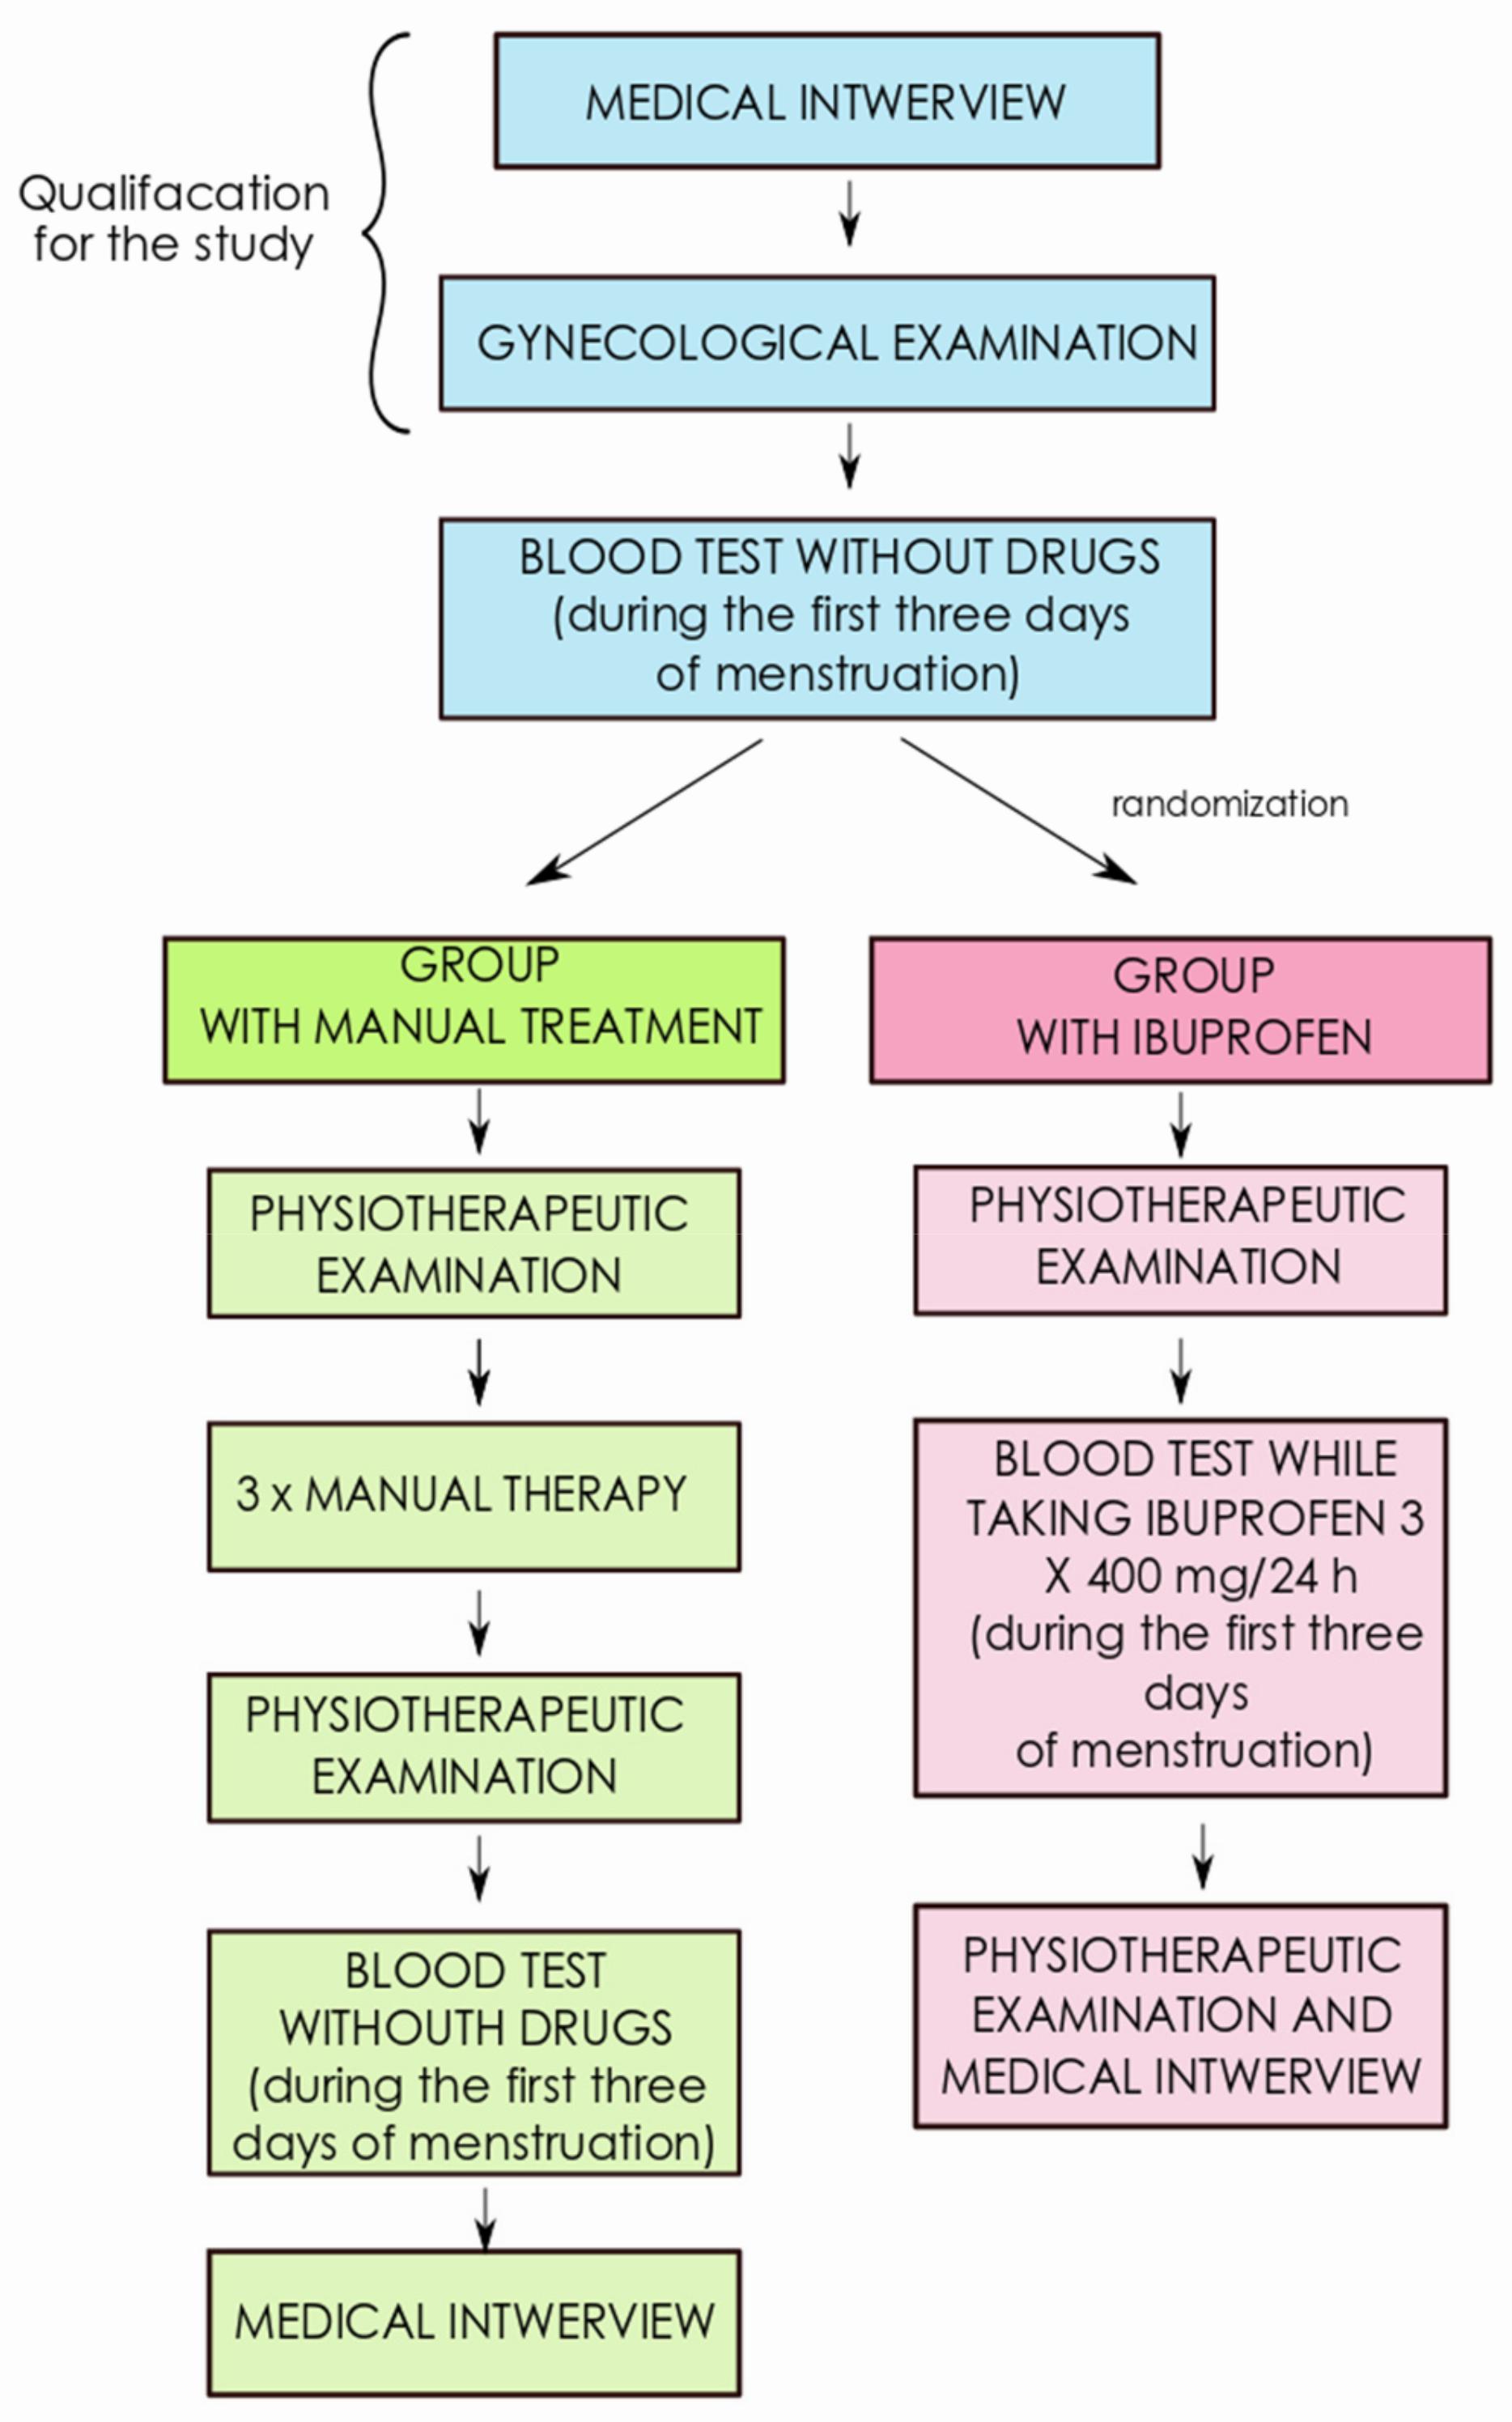 A flowchart showing the qualification for the study, and the two treatment groups.